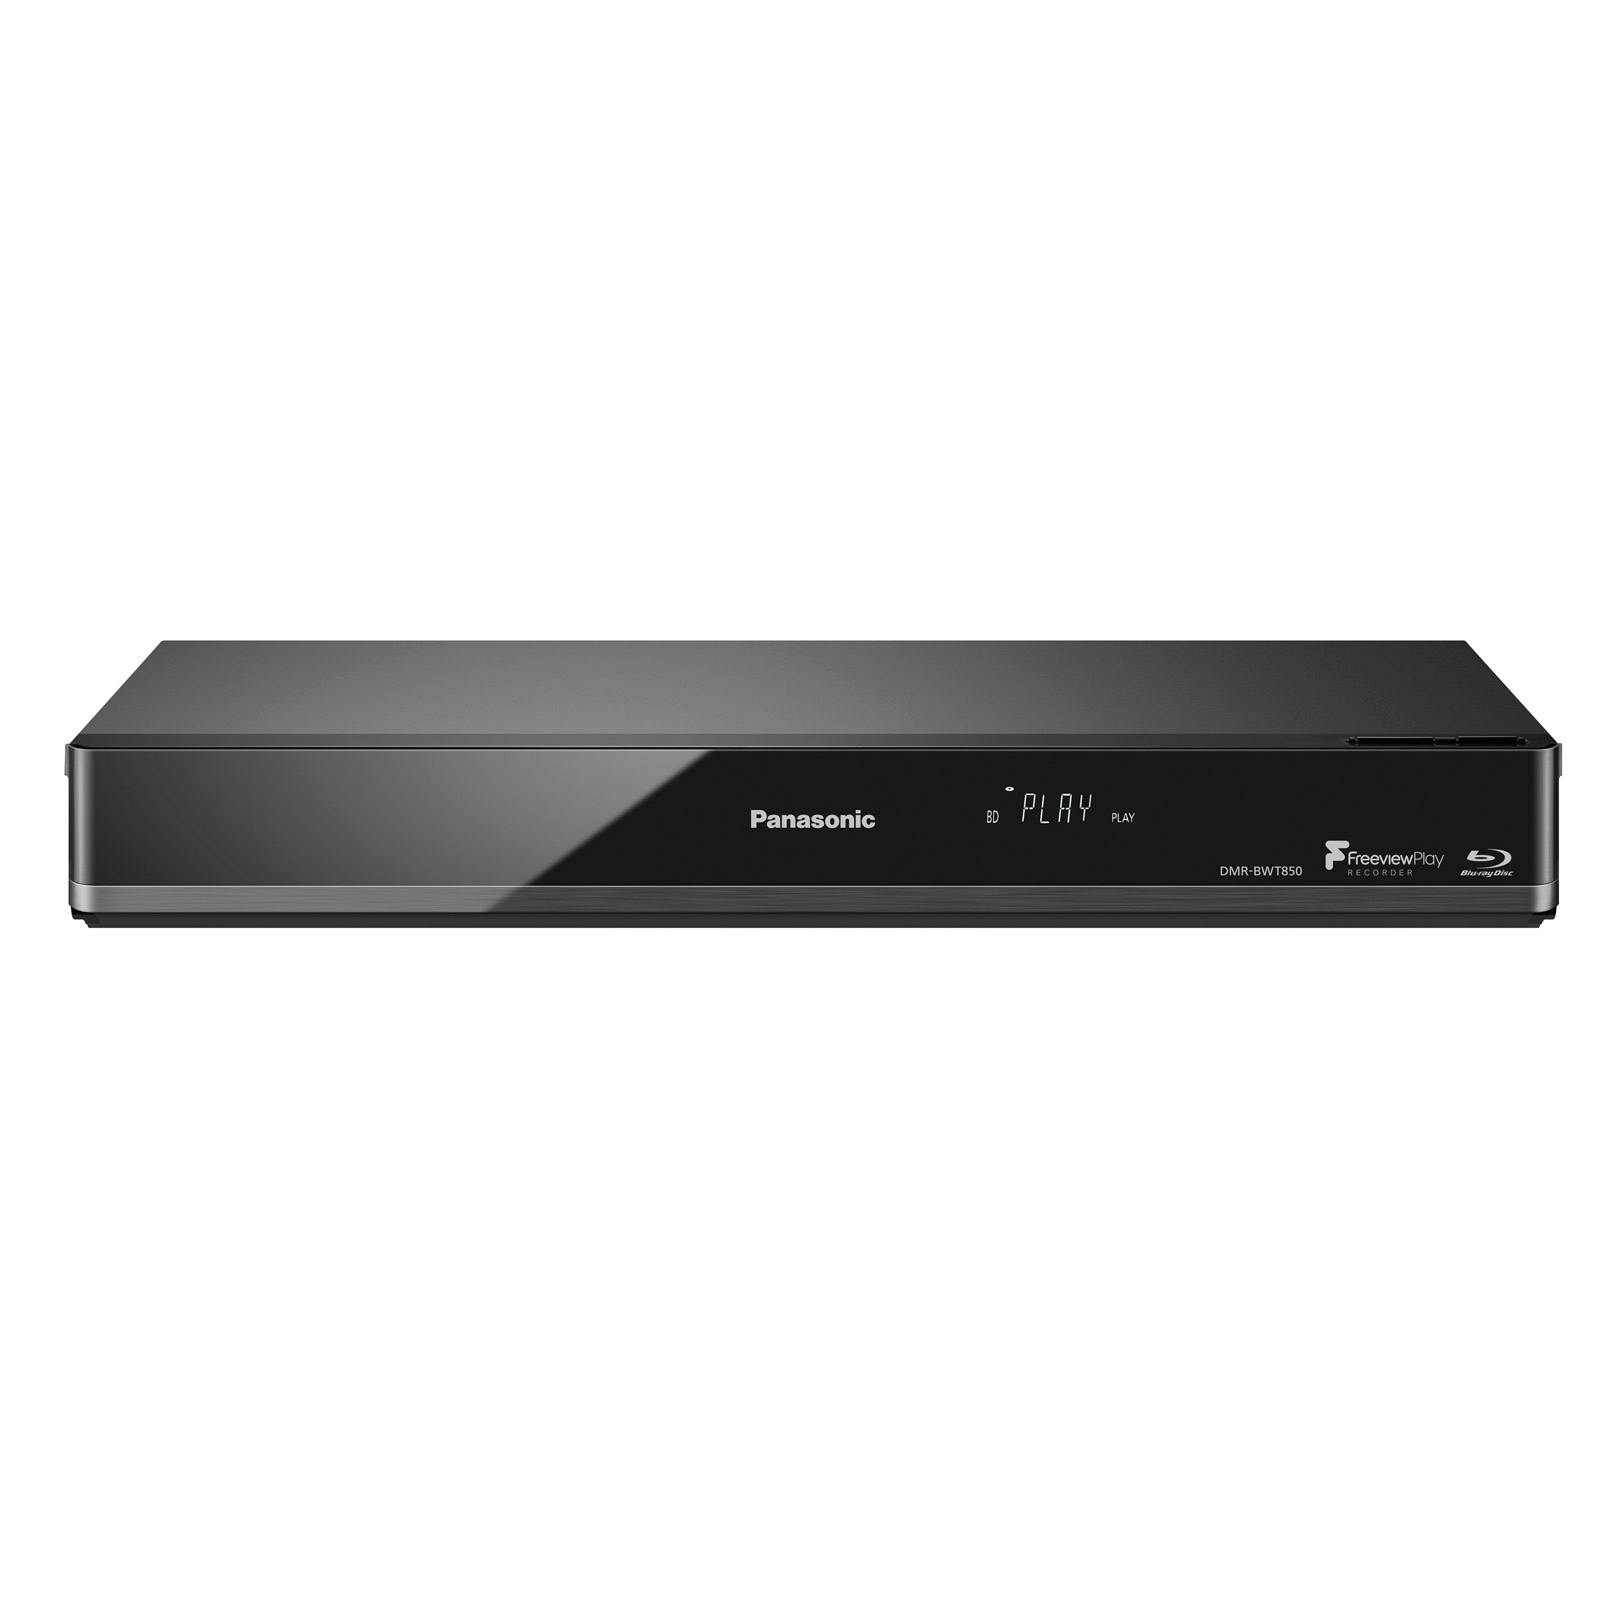 2d to 3d conversion blu ray players